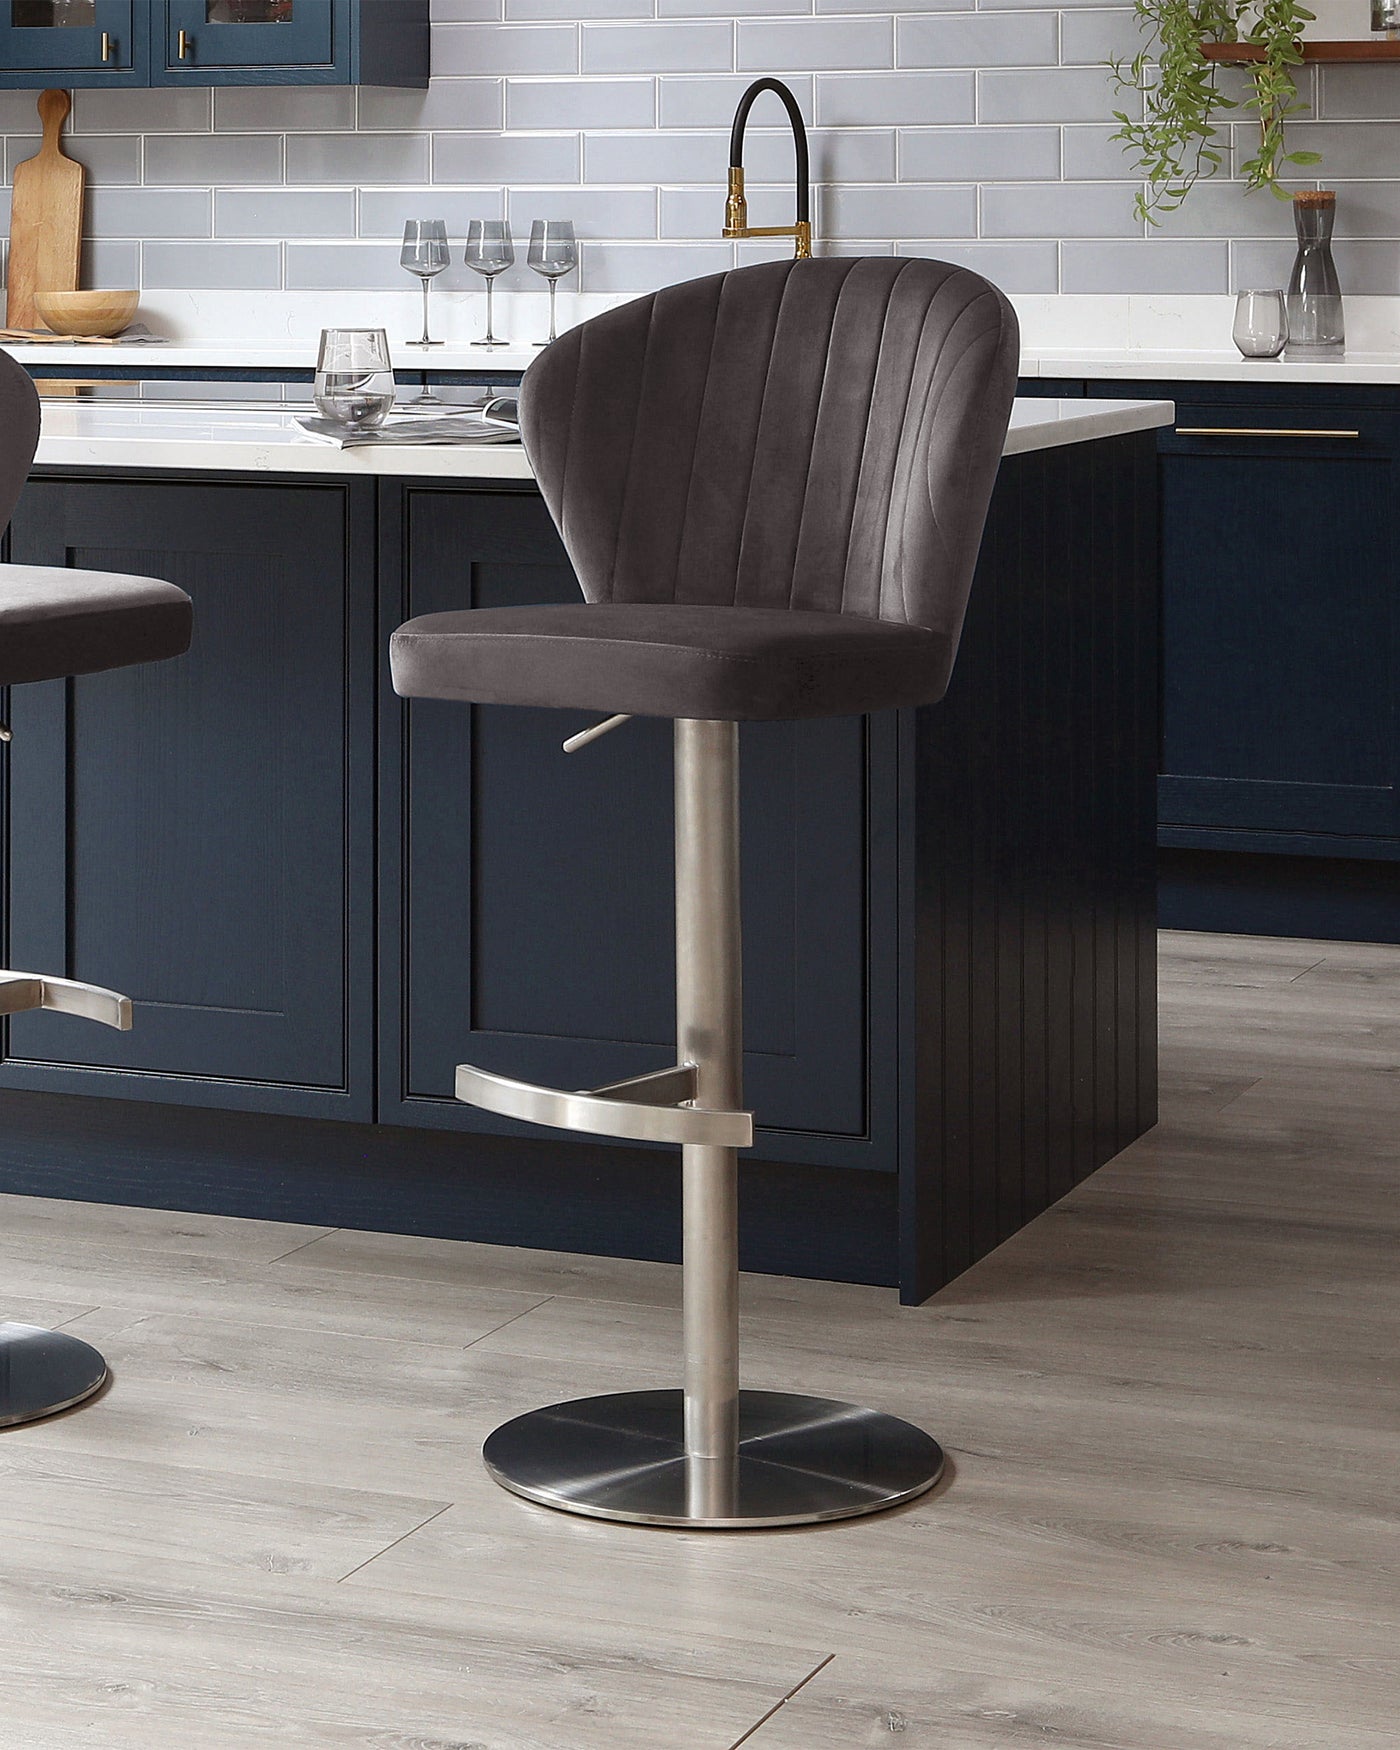 Elegant modern bar stool with a curved, channel-tufted backrest and plush seat upholstered in dark grey velvet fabric. The stool features an adjustable height mechanism, a sleek stainless steel pedestal base, and a built-in footrest for added comfort.